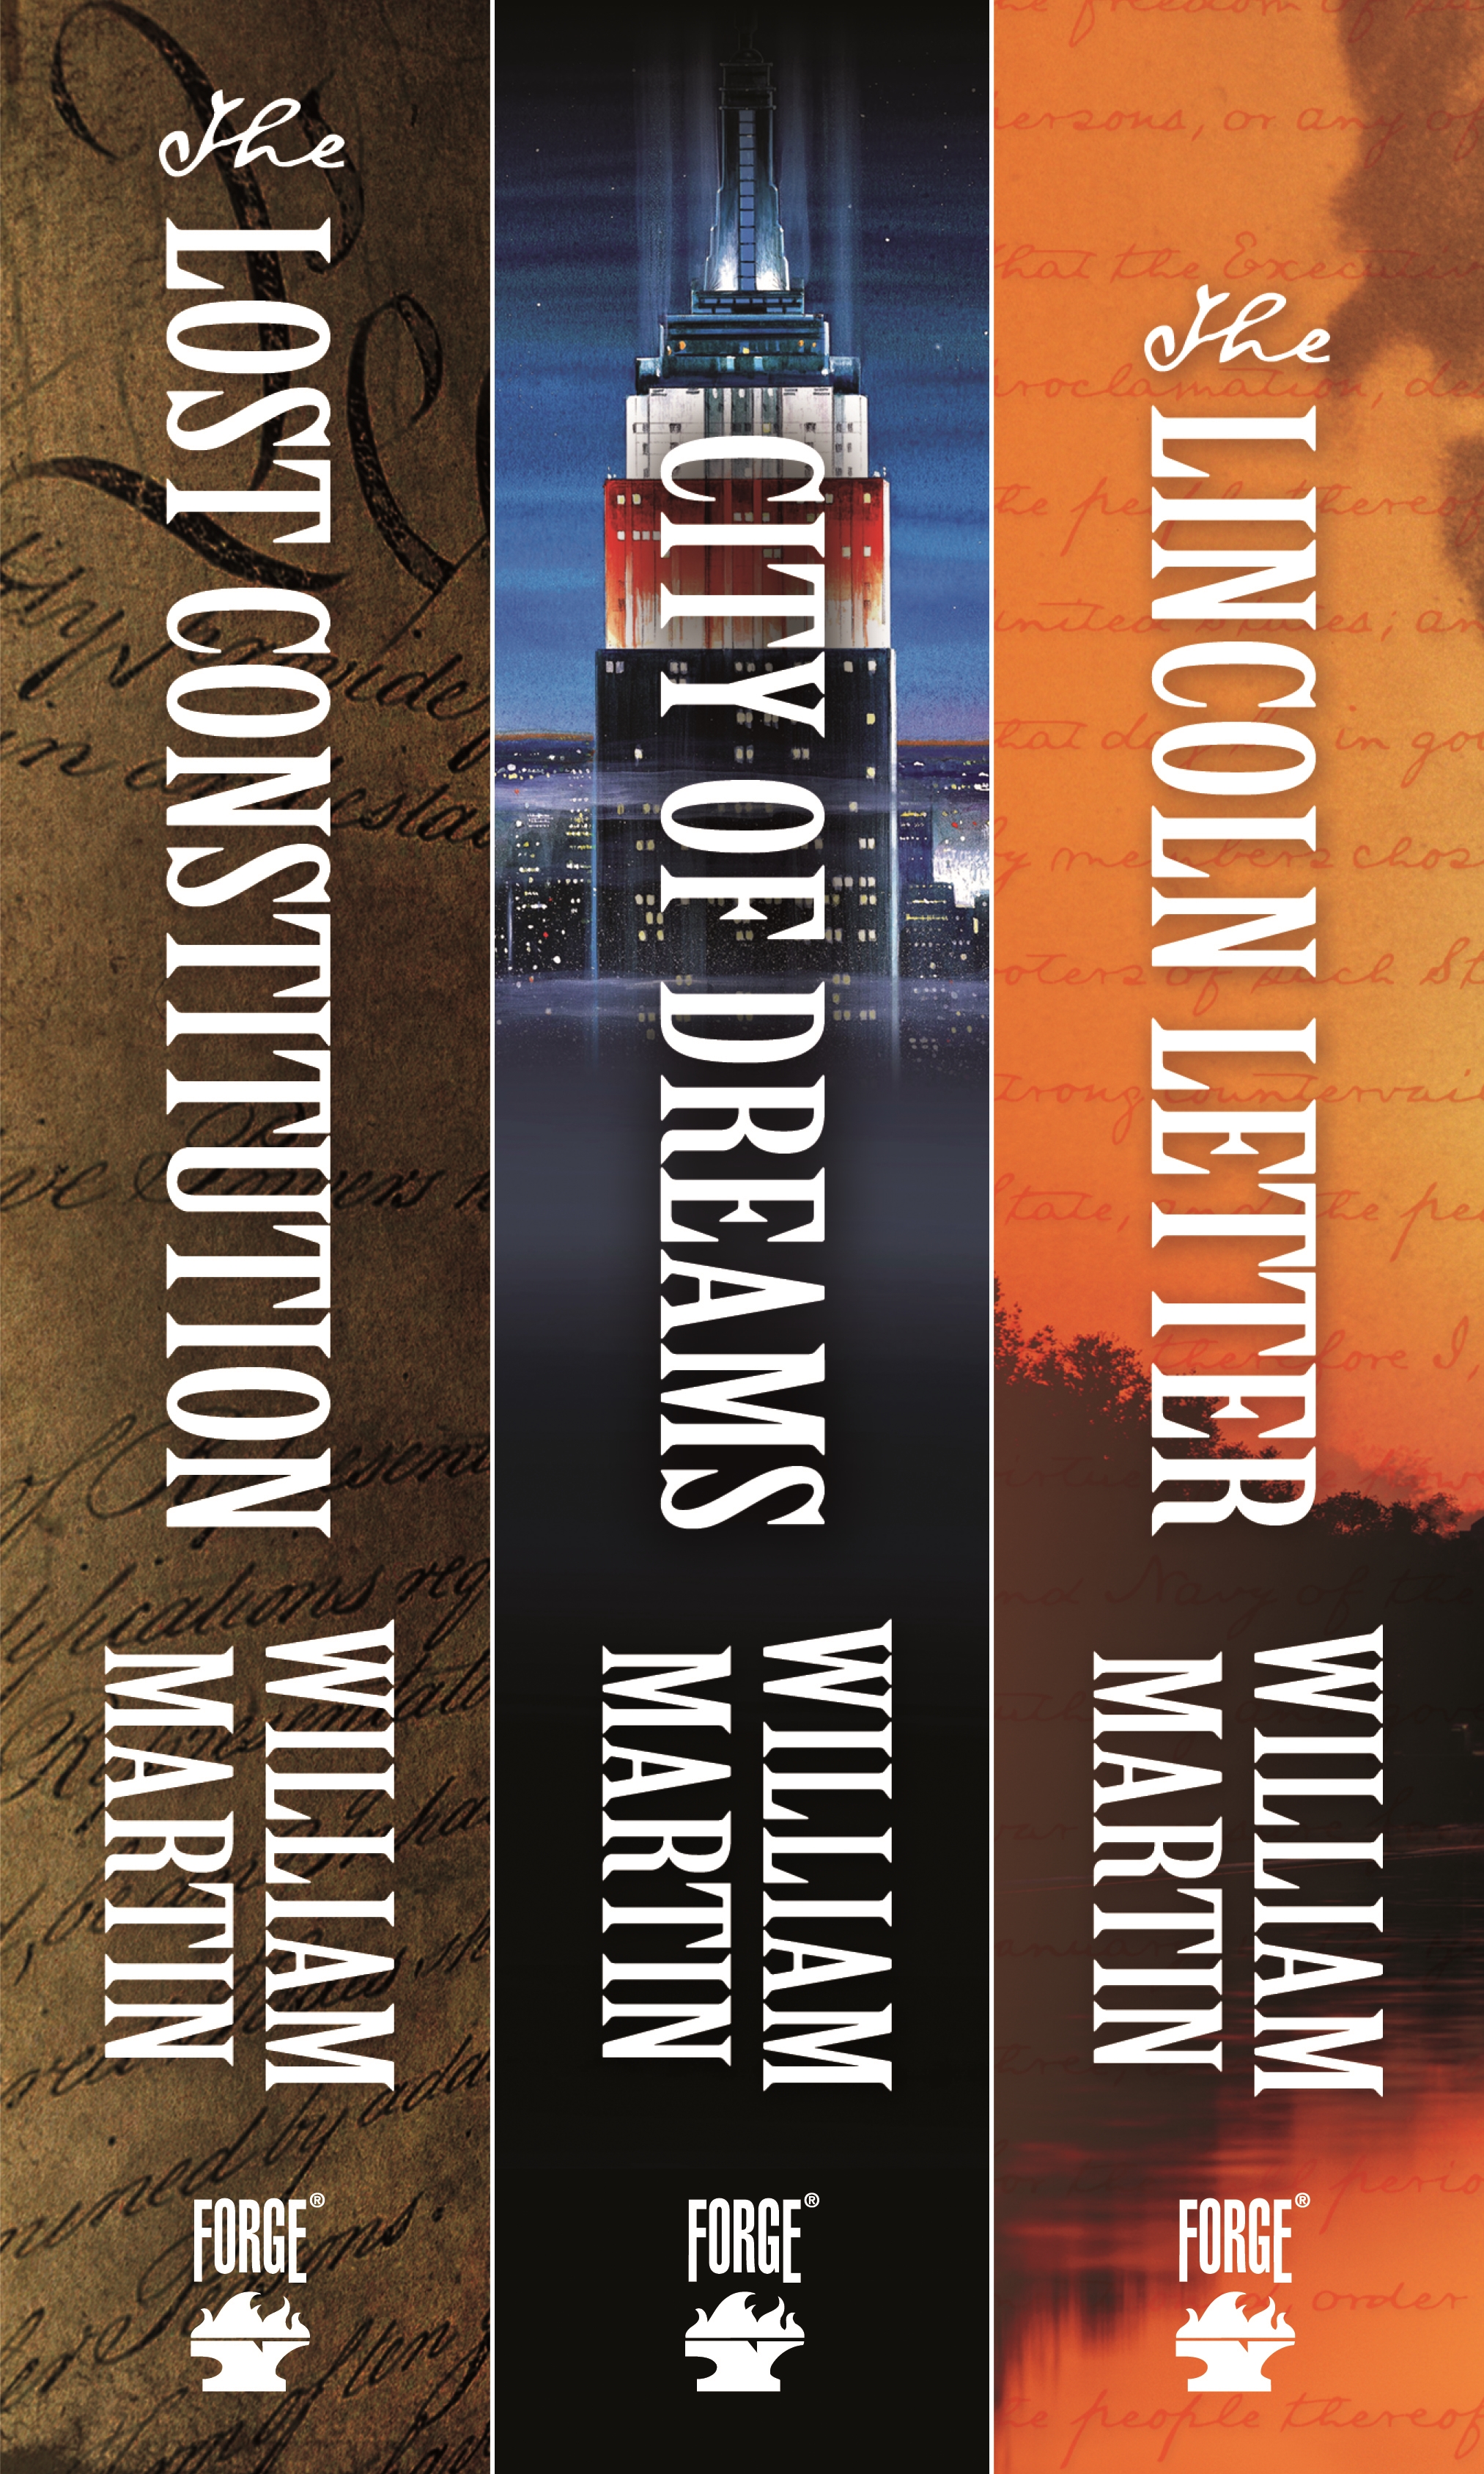 A Peter Fallon and Evangeline Carrington Collection : The Lost Constitution, City of Dreams, The Lincoln Letter by William Martin